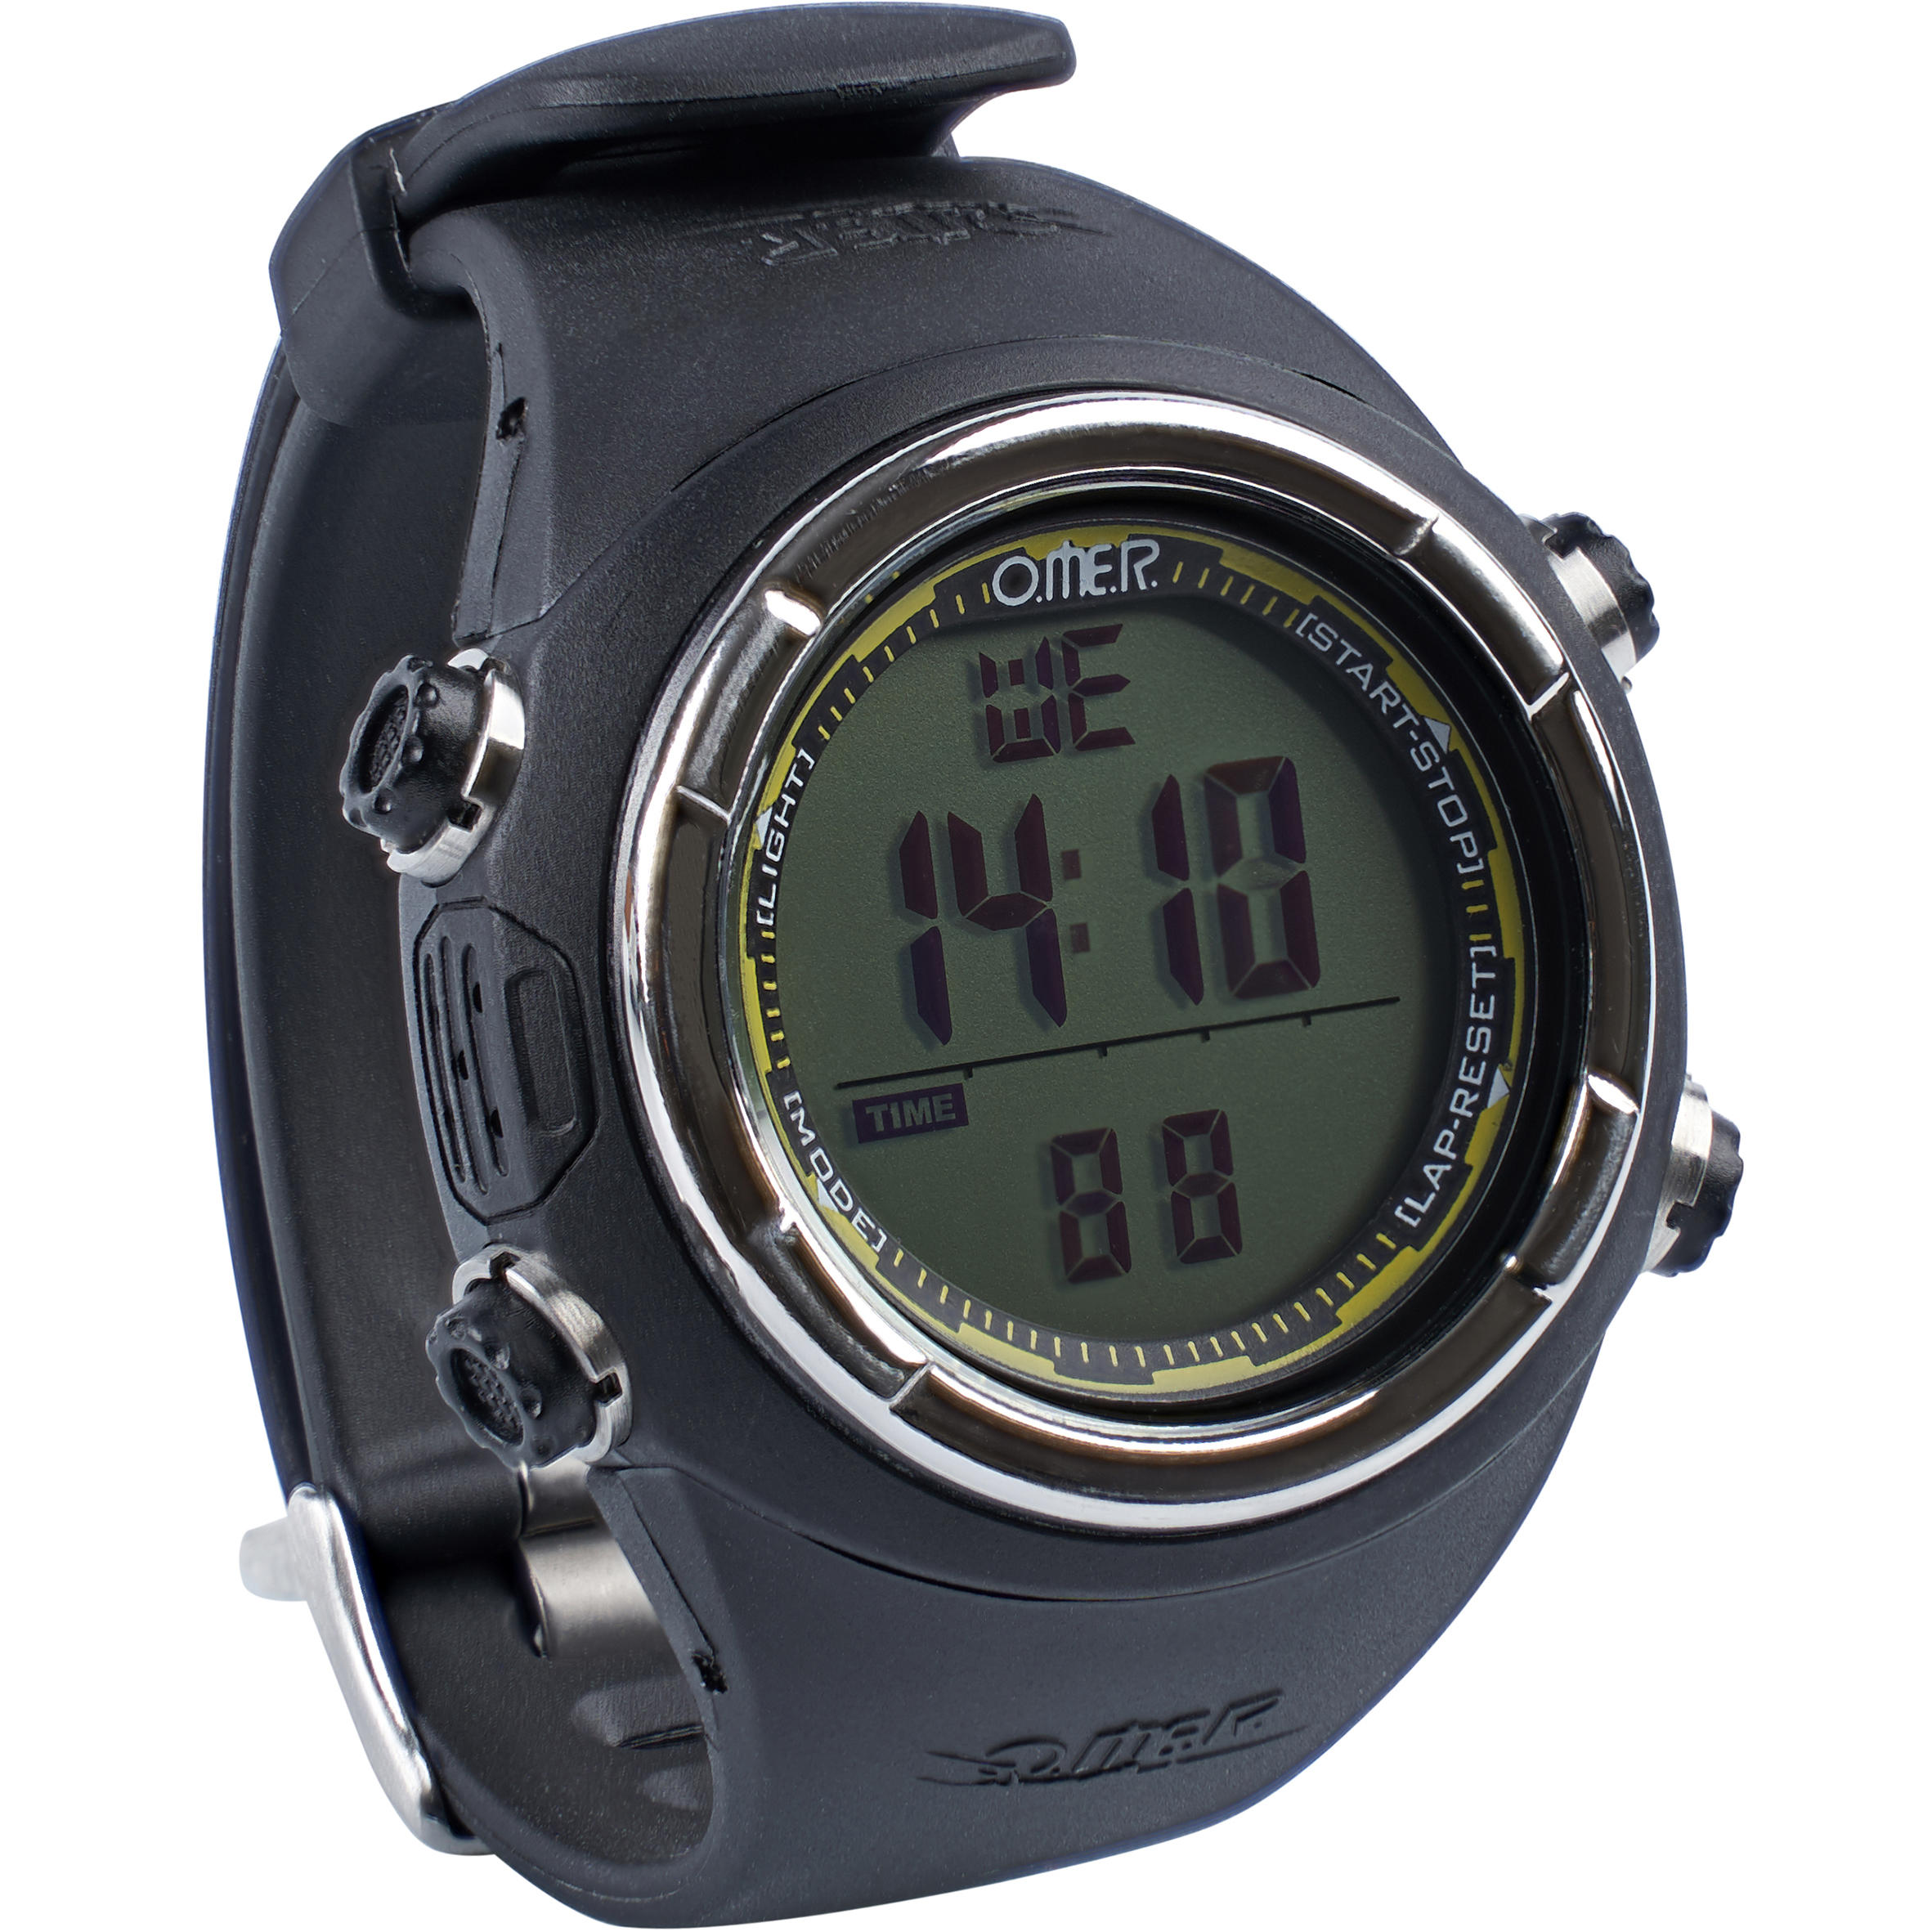 OMER Spearfishing and Free-Diving Dive Computer Watch Mistral